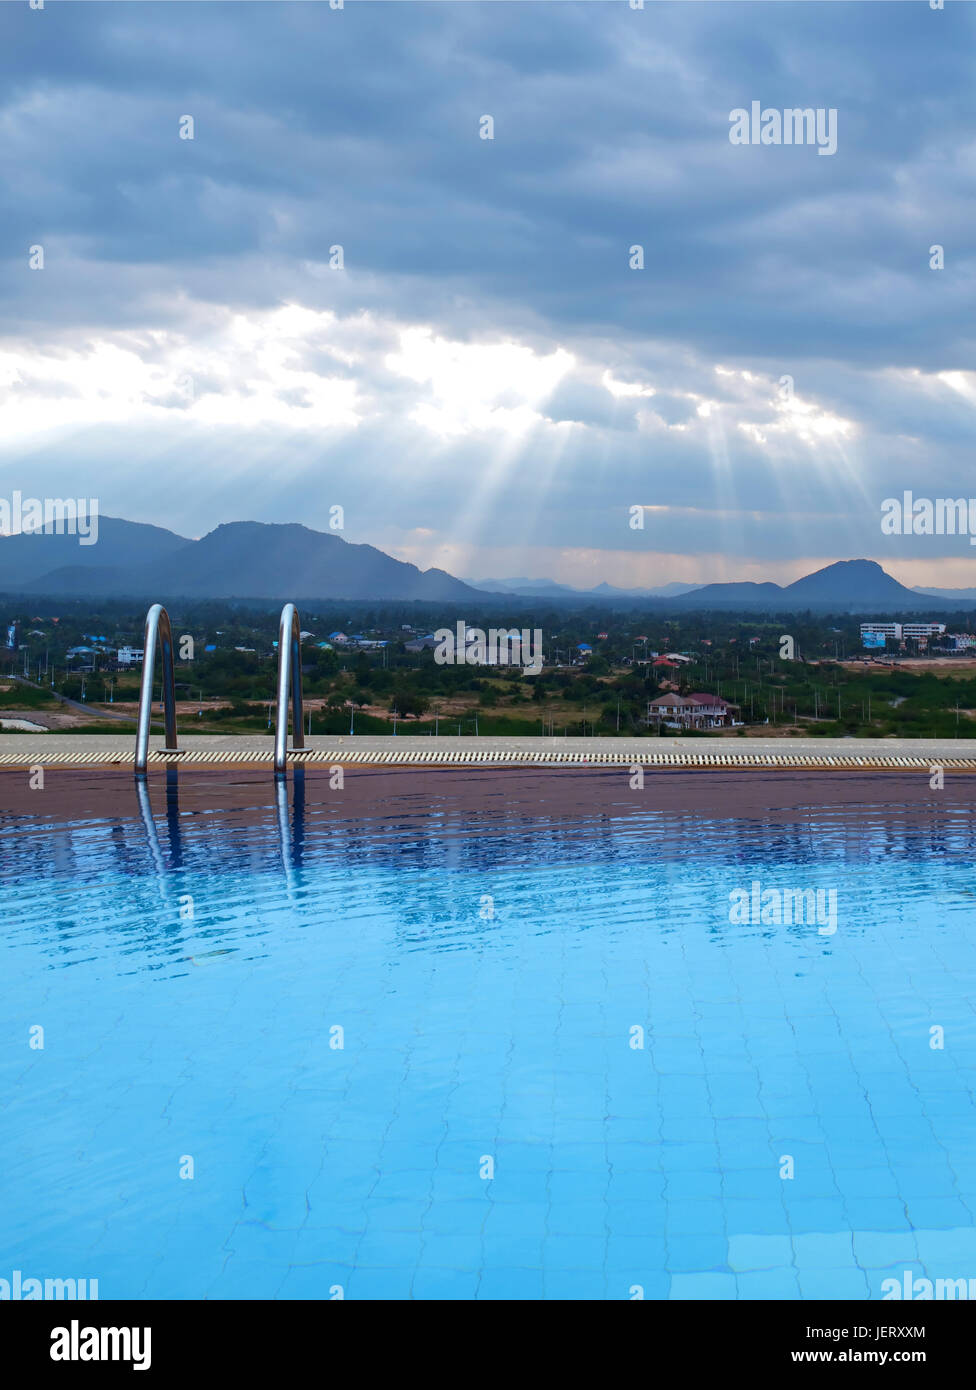 Outdoor swimming pool with sunbeam over mountains Stock Photo